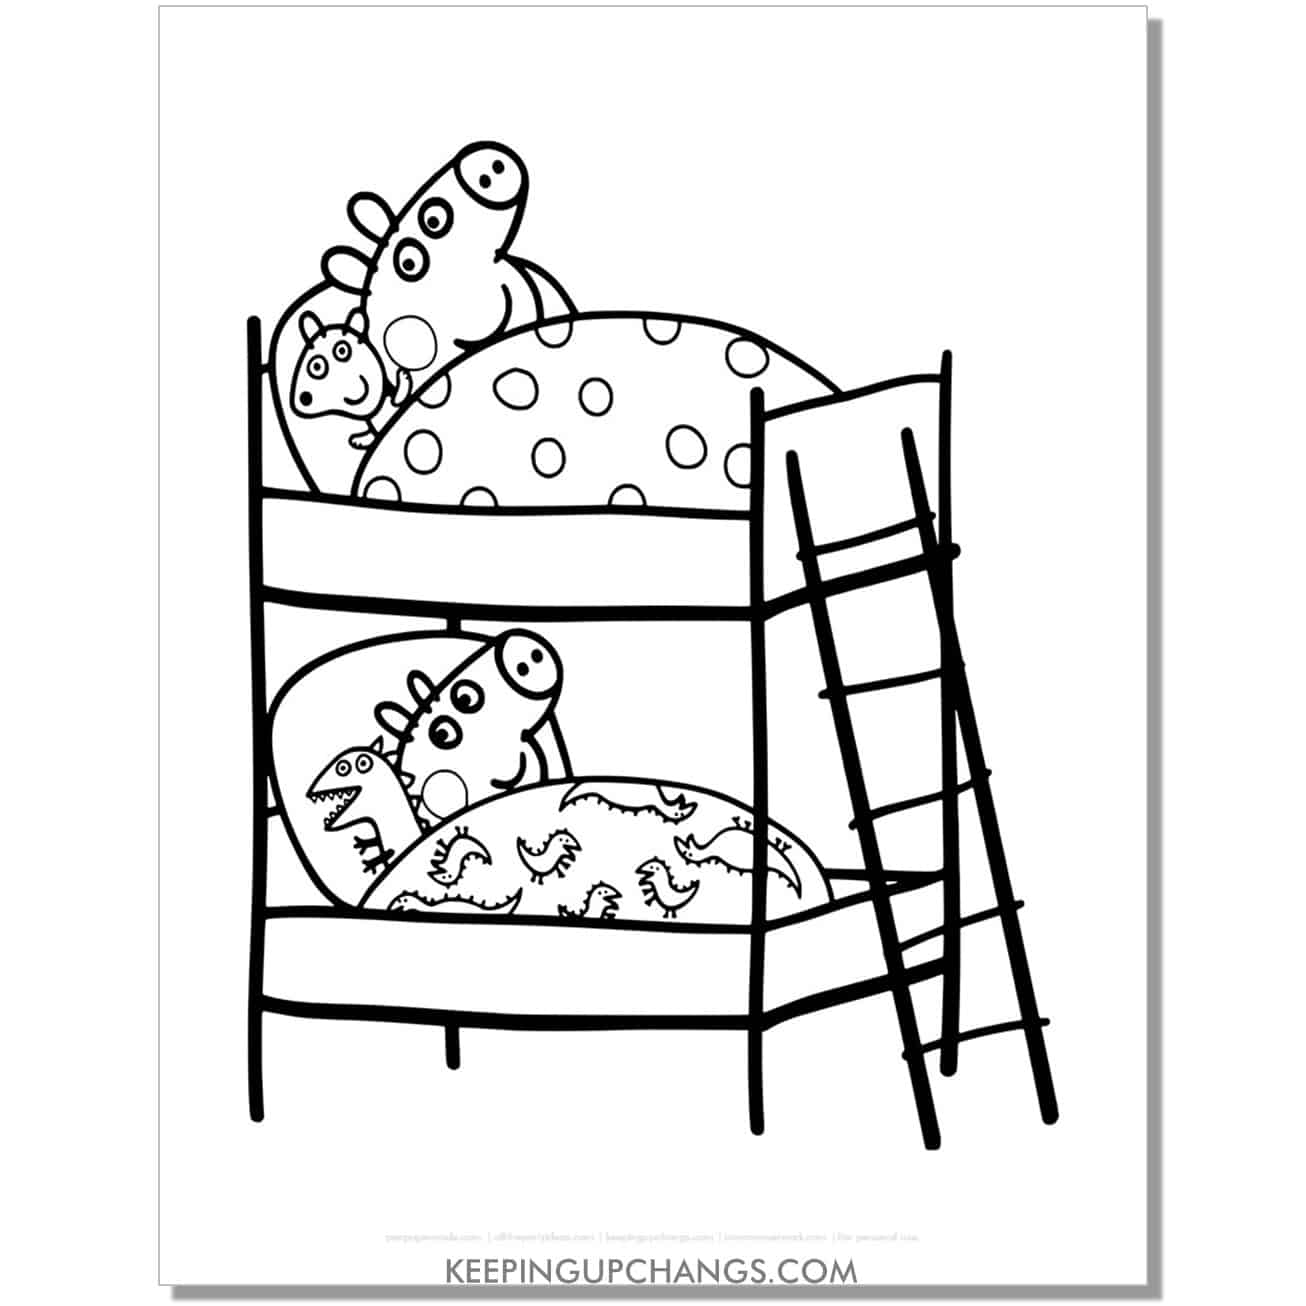 free bedtime george and peppa pig coloring page, sheet.